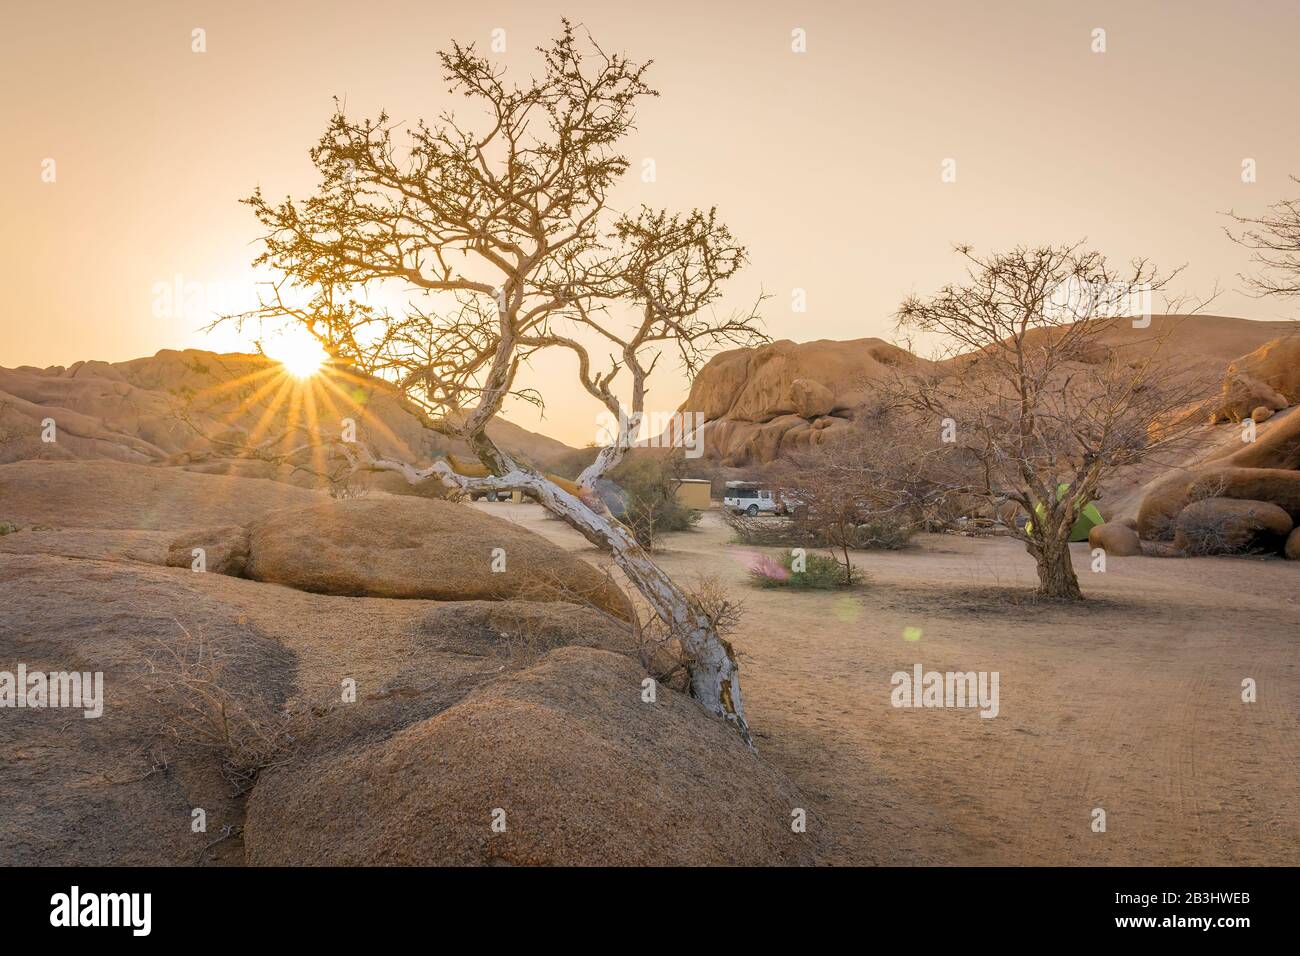 Camping life at sunrise in the Spitzkoppe National Park in Namibia. Stock Photo